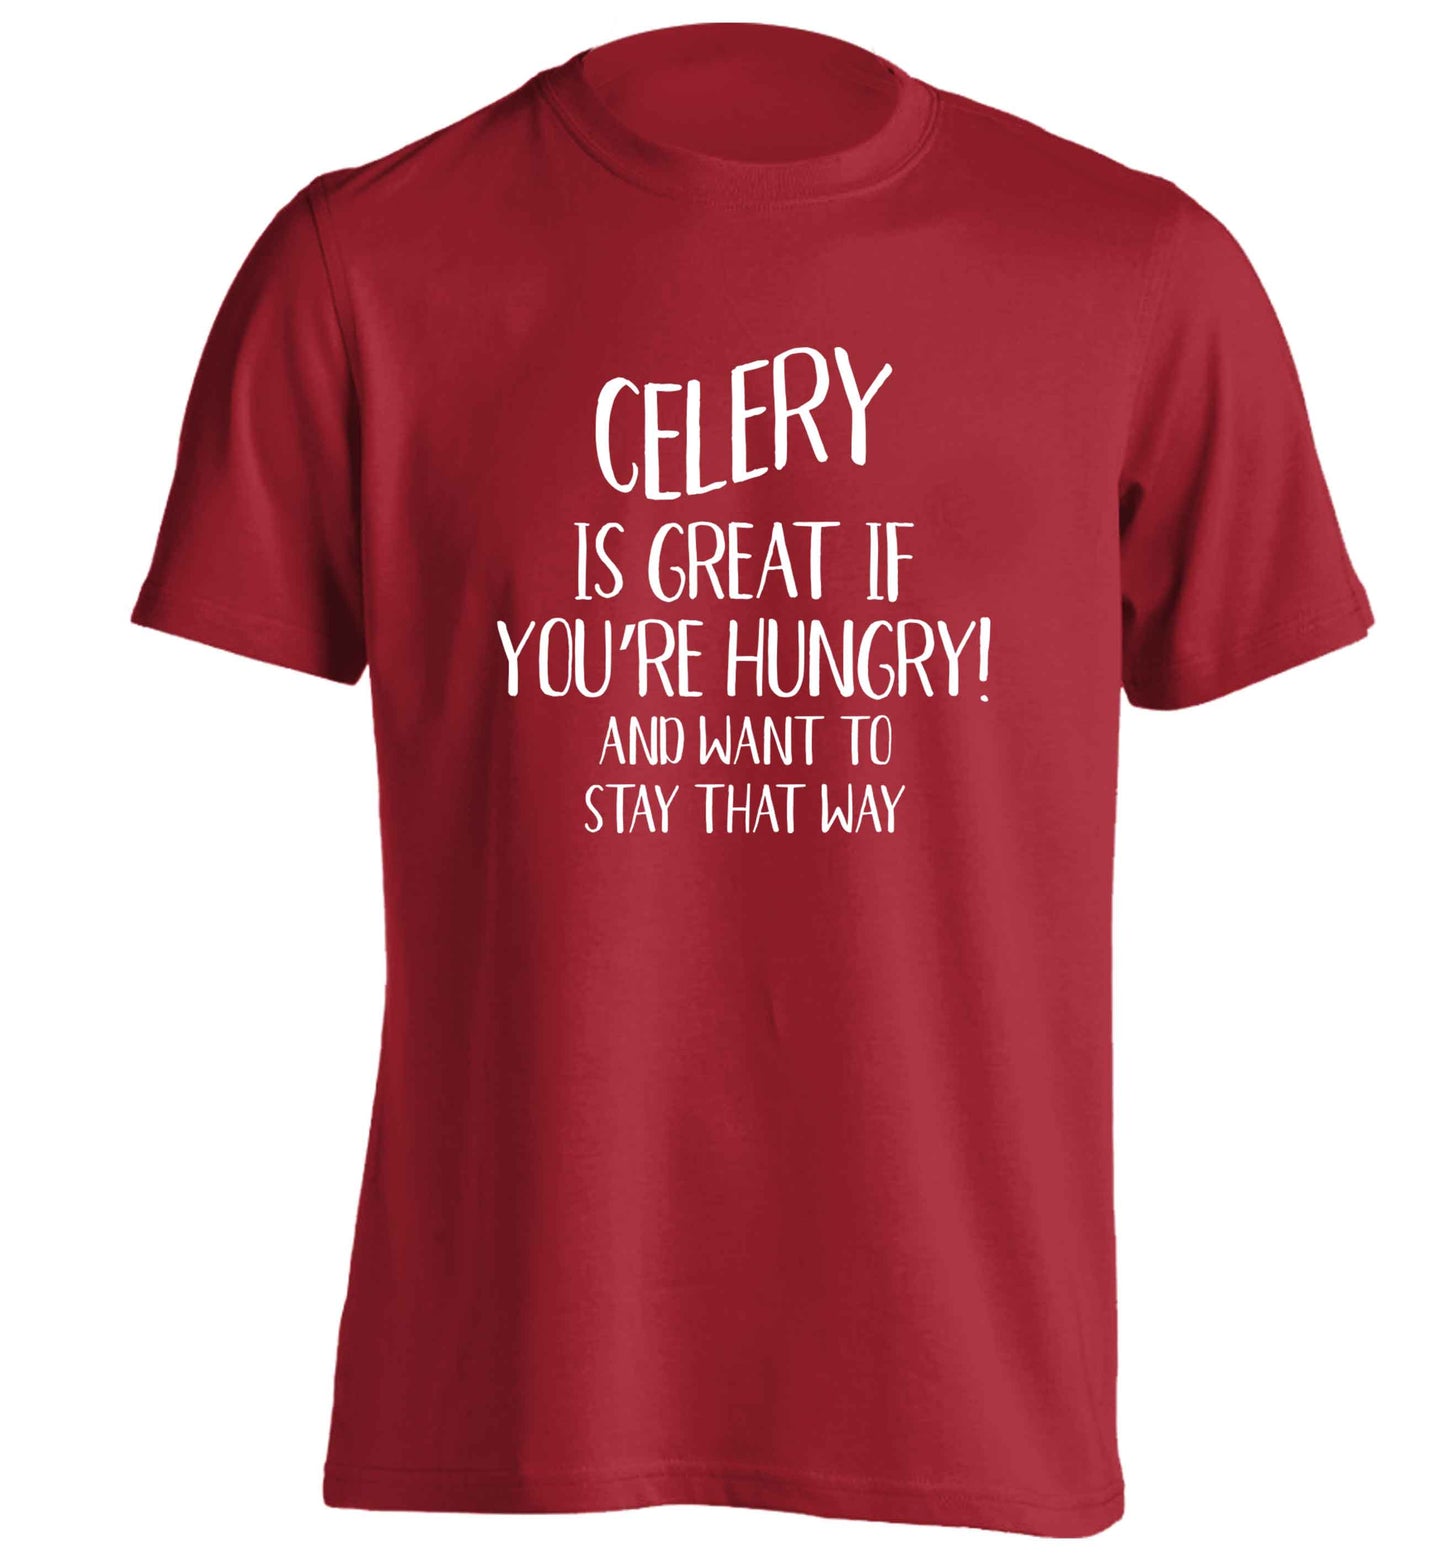 Cellery is great when you're hungry and want to stay that way adults unisex red Tshirt 2XL